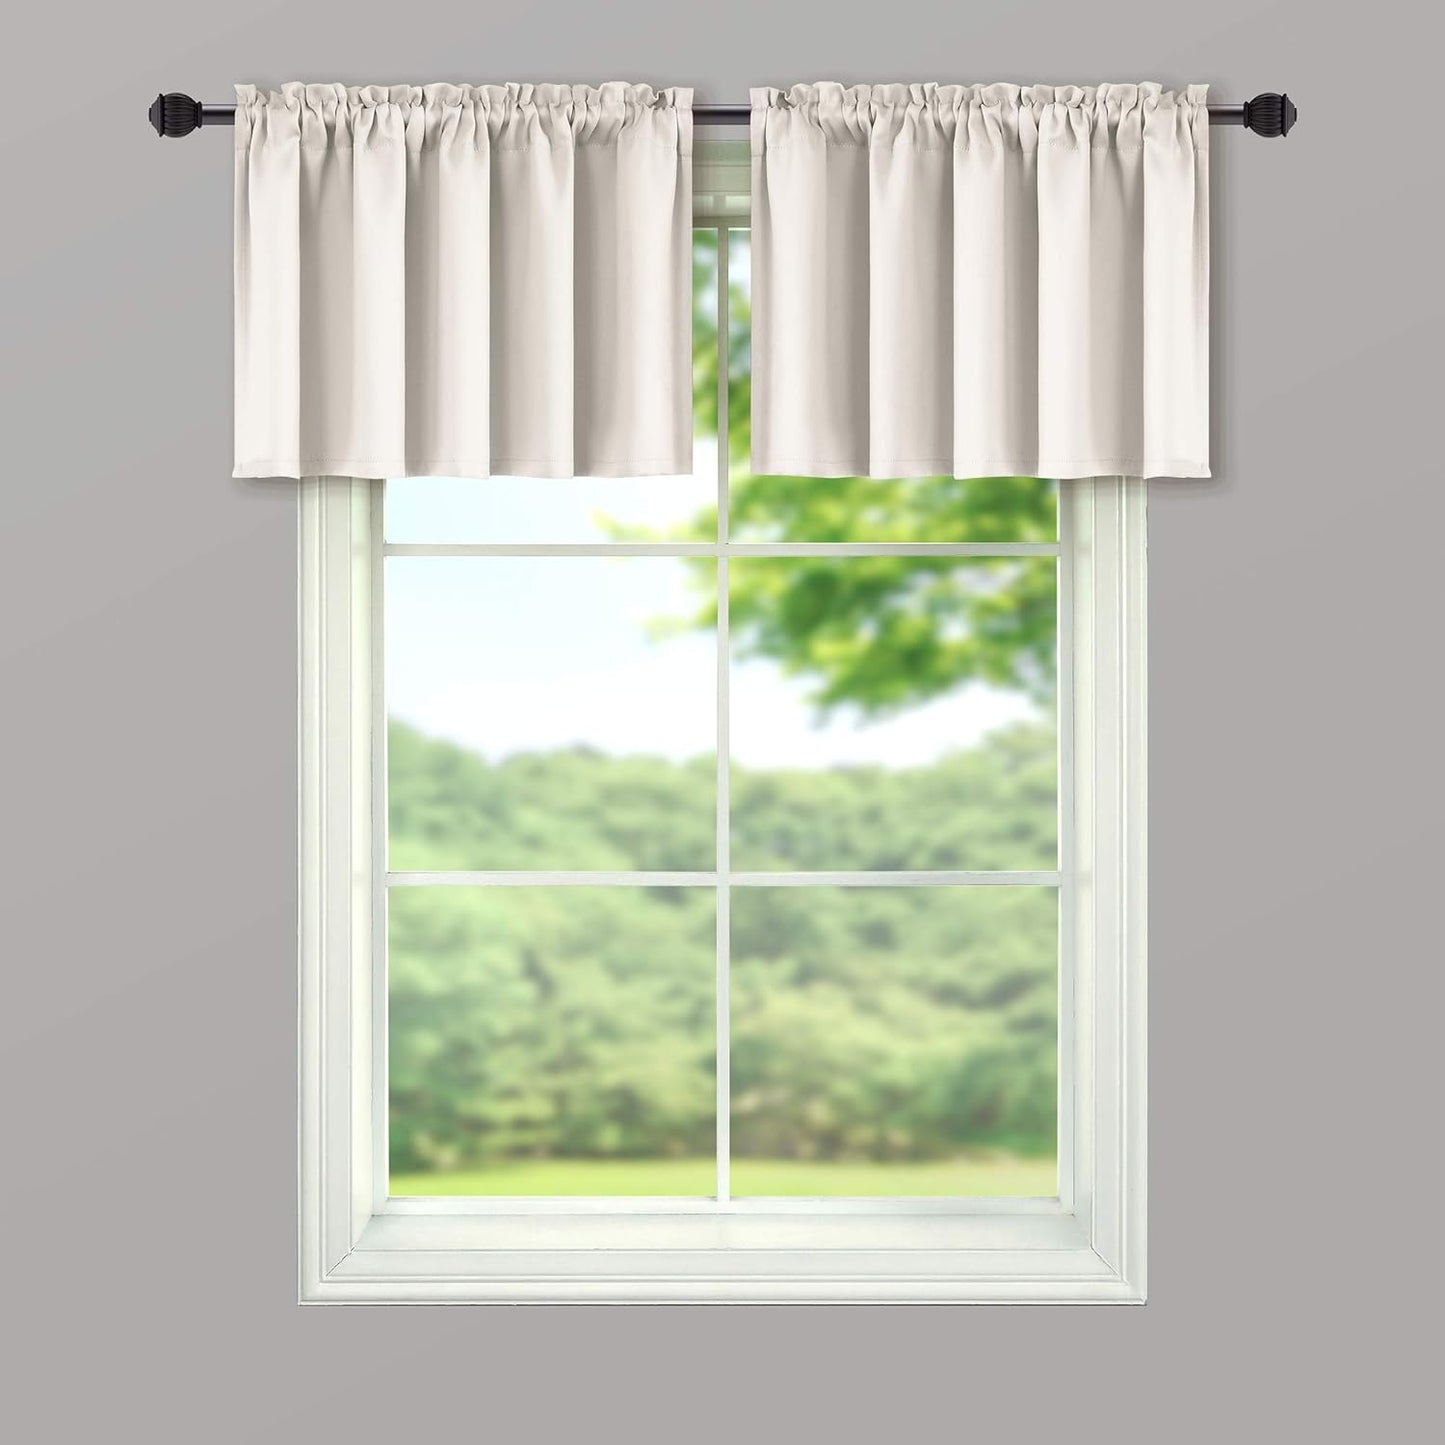 Mrs.Naturall Beige Valance Curtains for Windows 36X16 Inch Length  MRS.NATURALL TEXTILE   